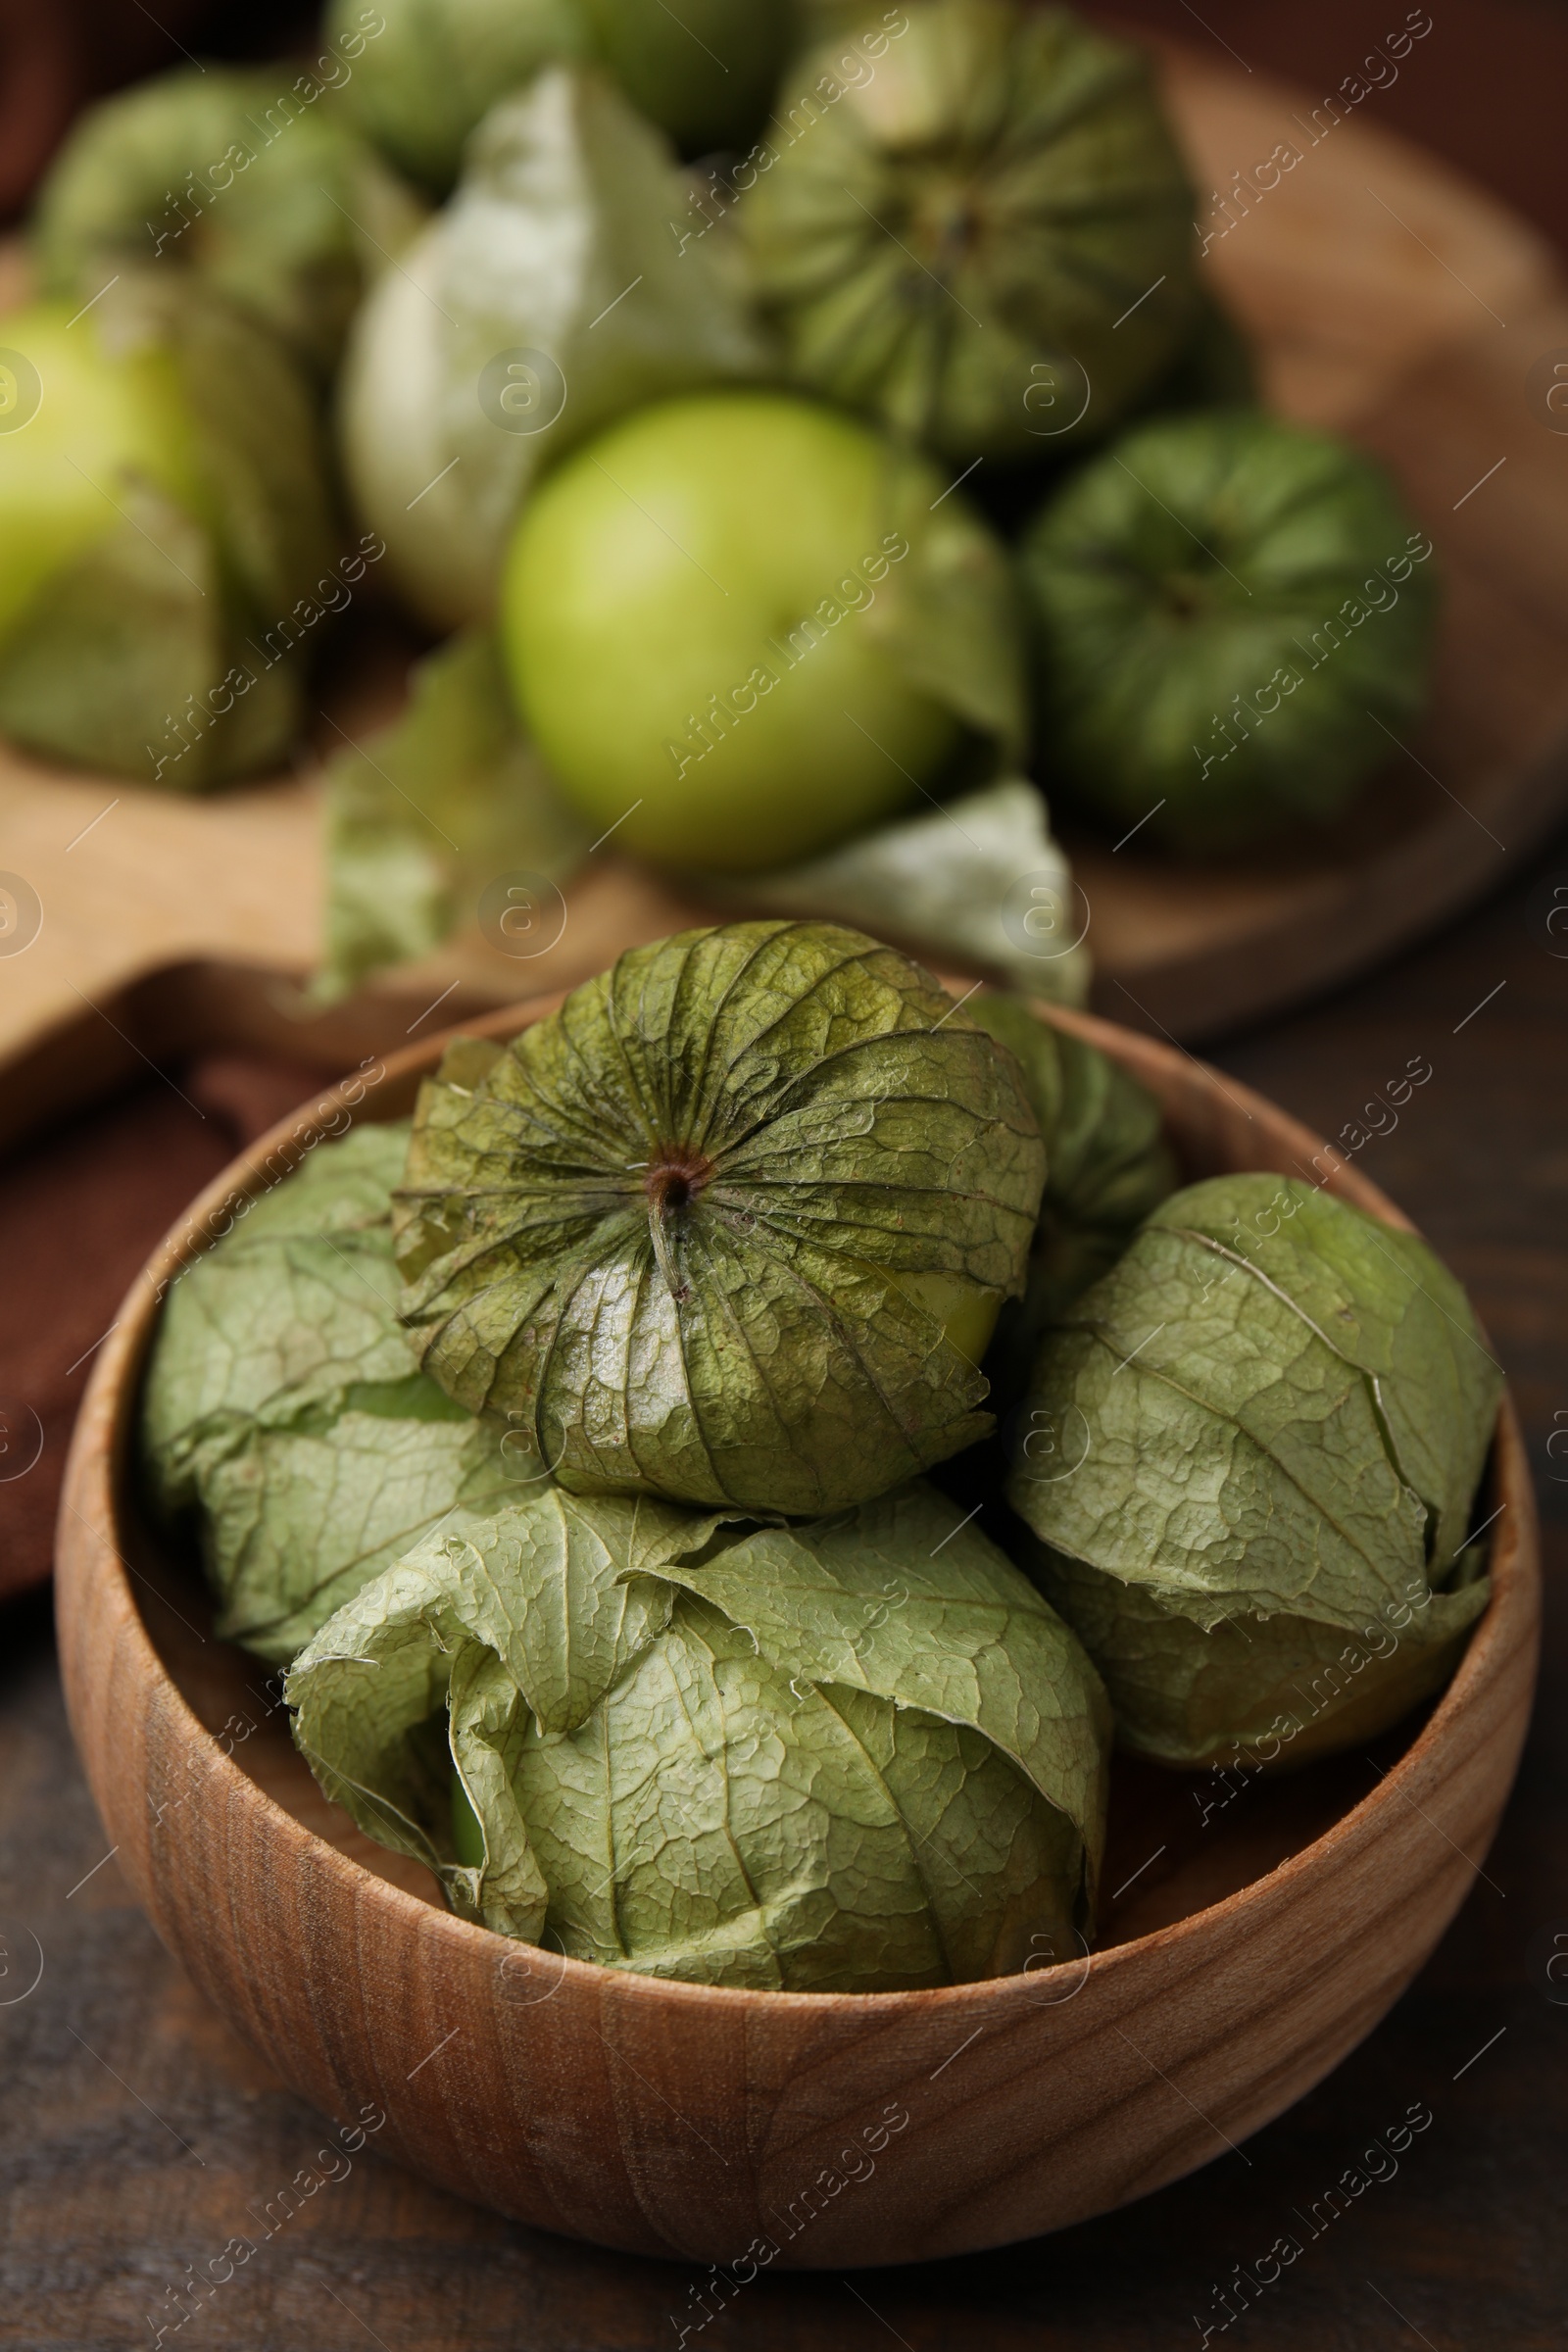 Photo of Fresh green tomatillos with husk in bowl on wooden table, closeup